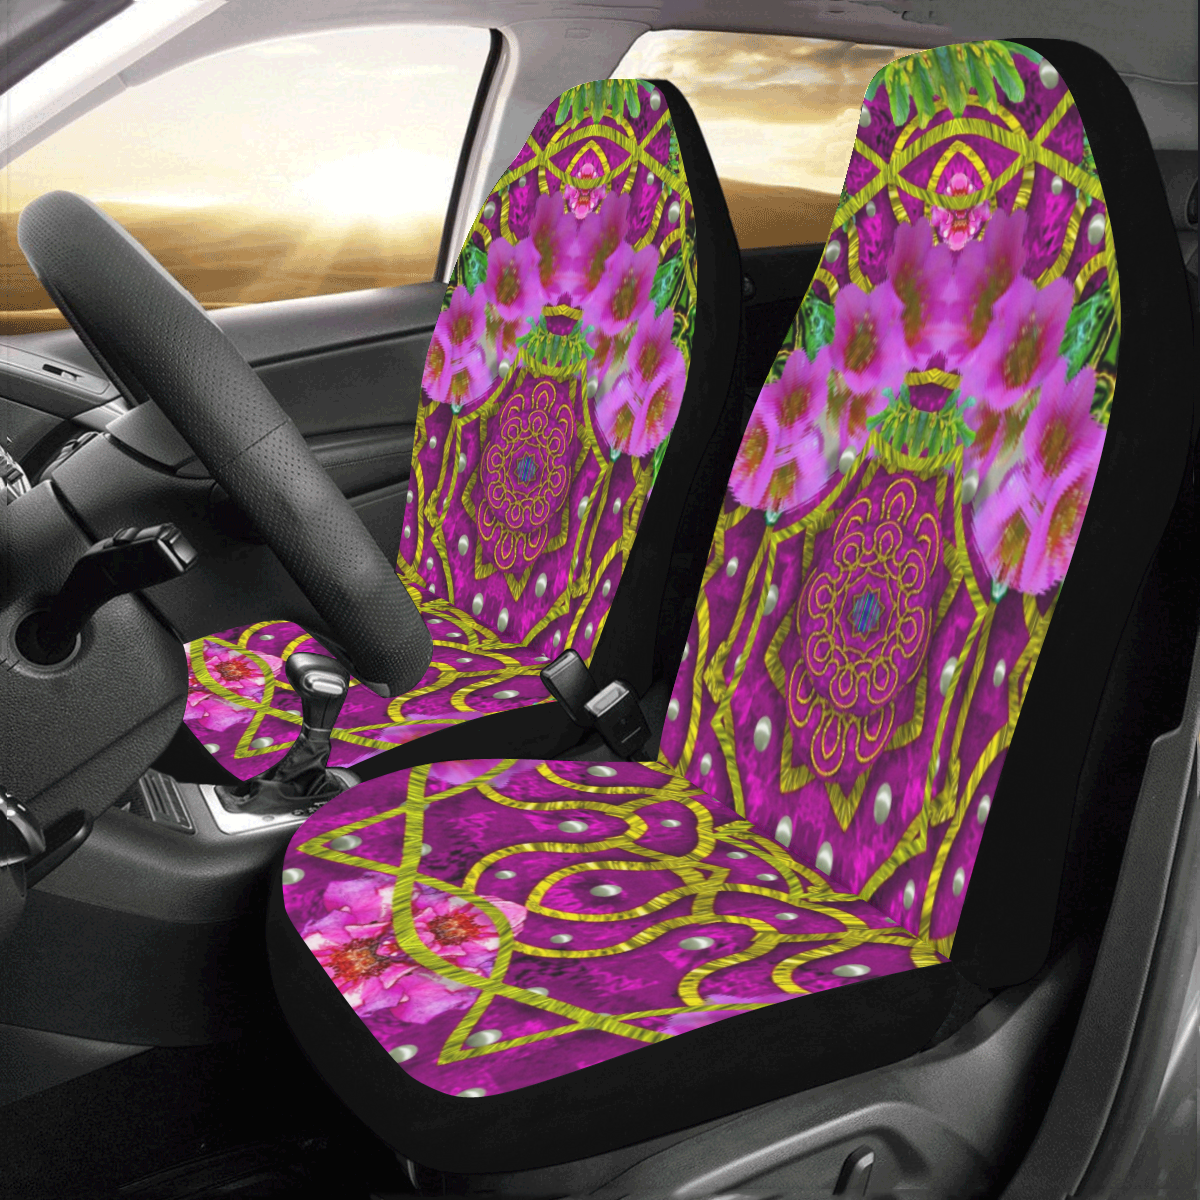 Star of freedom ornate rainfall Car Seat Covers (Set of 2)